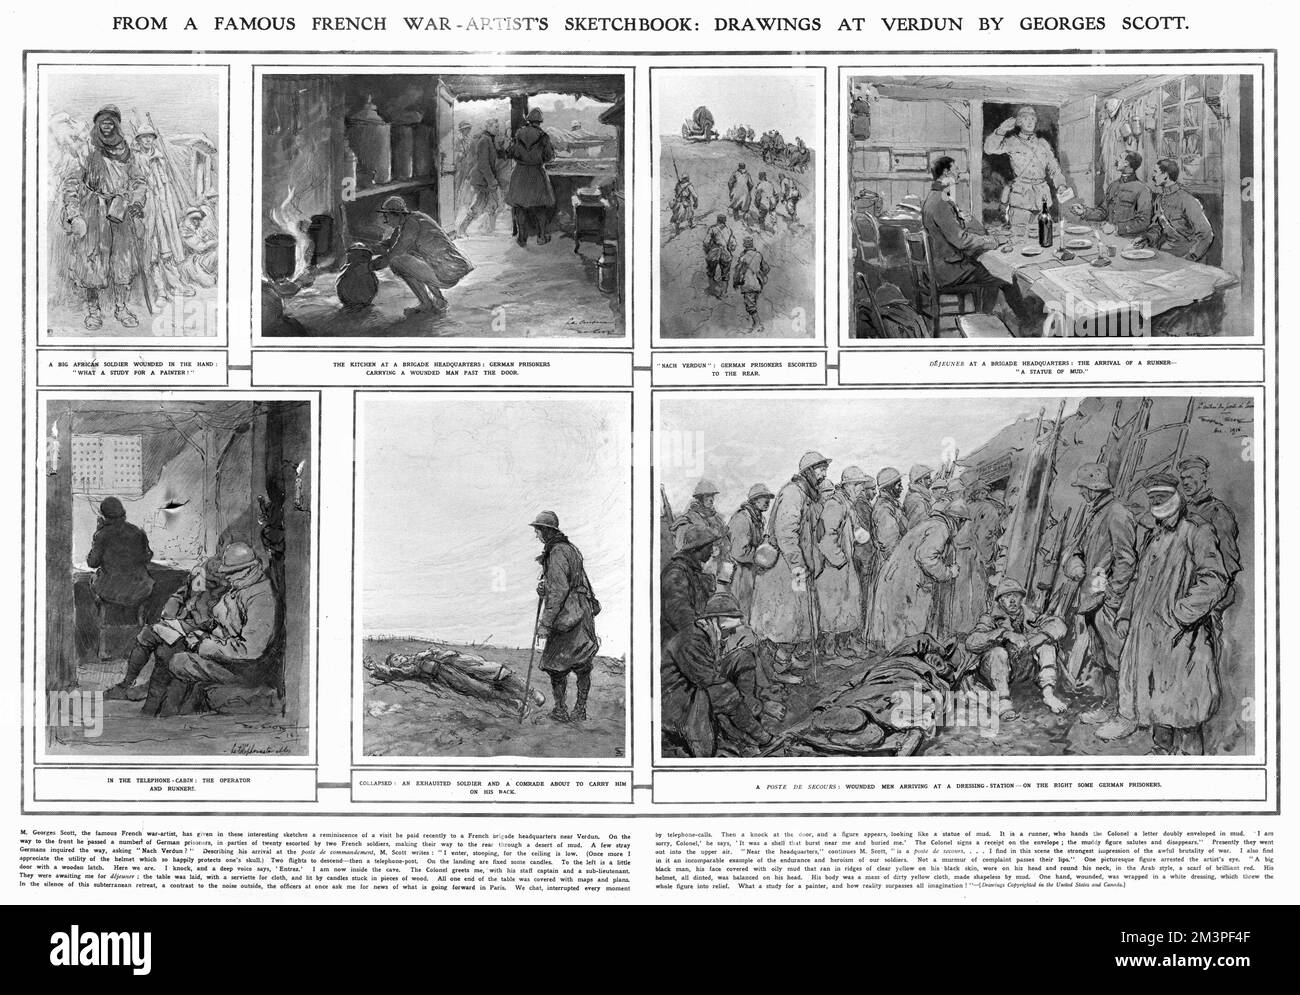 A double page spread from The Illustrated London News, 27 January 1917, with sketches by the French war-artist Georges Scott illustrating a visit he had made to a French brigade headquarters near Verdun. Clockwise from top left: 1. An African soldier with a wounded hand; 2. The kitchen at brigade headquarters; 3. German prisoners escorted to the rear; 4. Dejeuner at a Brigade headquarters; 5. Wounded men arriving at a dressing-station; 6. An exhausted soldier and the comrade who is about to carry him on his back; 7. In the telephone cabin, the operator and runners.     Date: 1917 Stock Photo